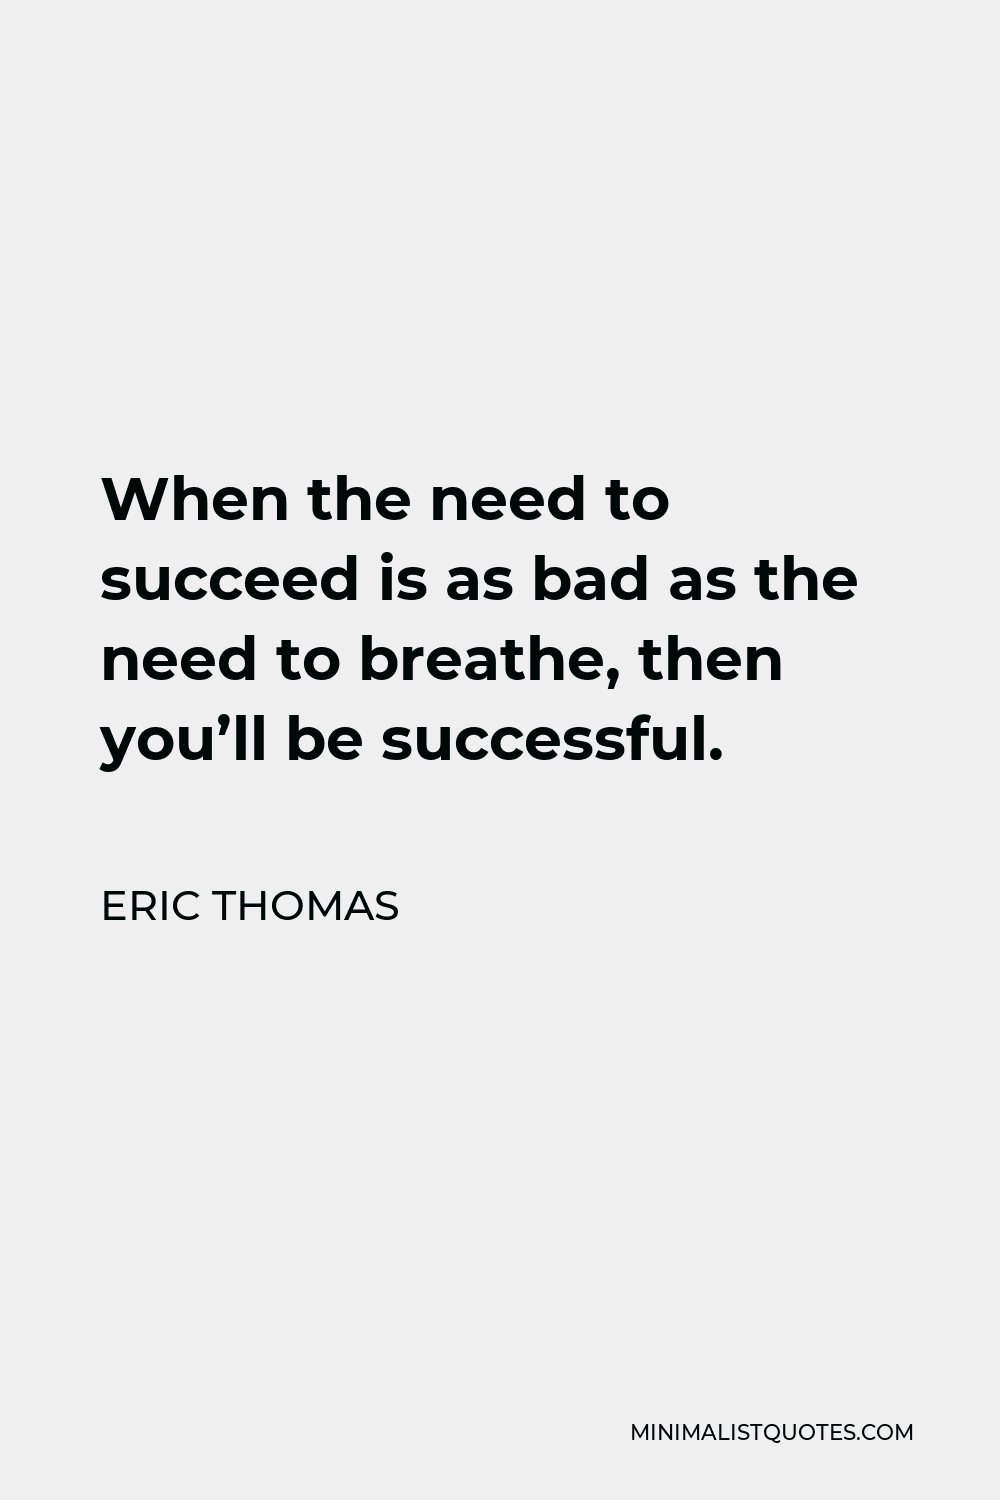 Eric Thomas Quote - When the need to succeed is as bad as the need to breathe, then you’ll be successful.